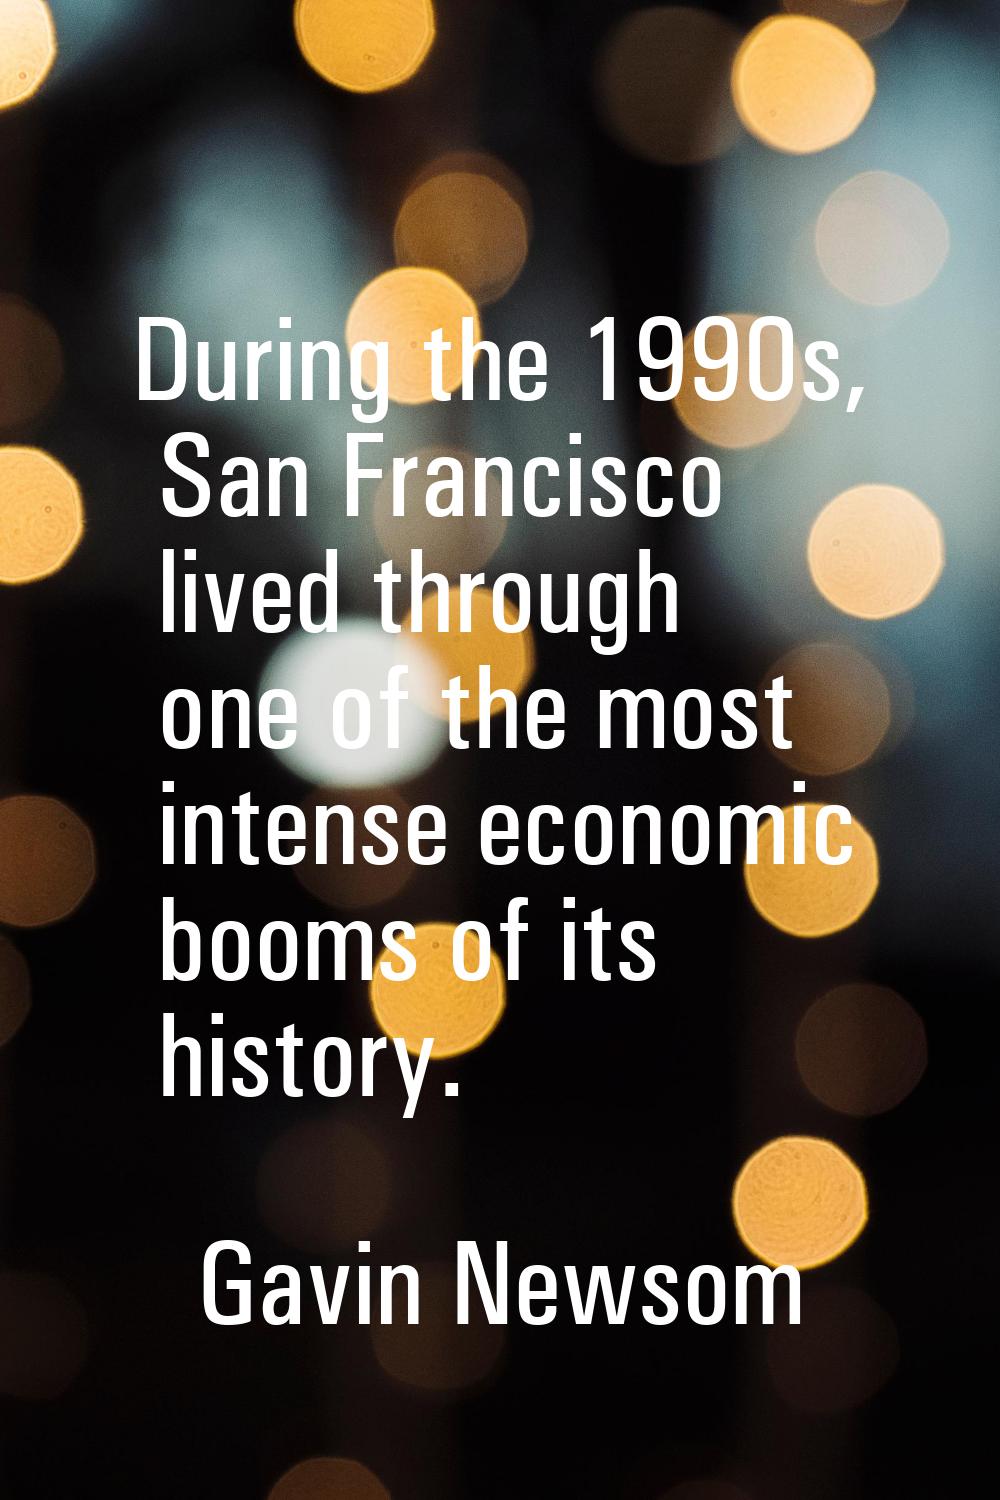 During the 1990s, San Francisco lived through one of the most intense economic booms of its history